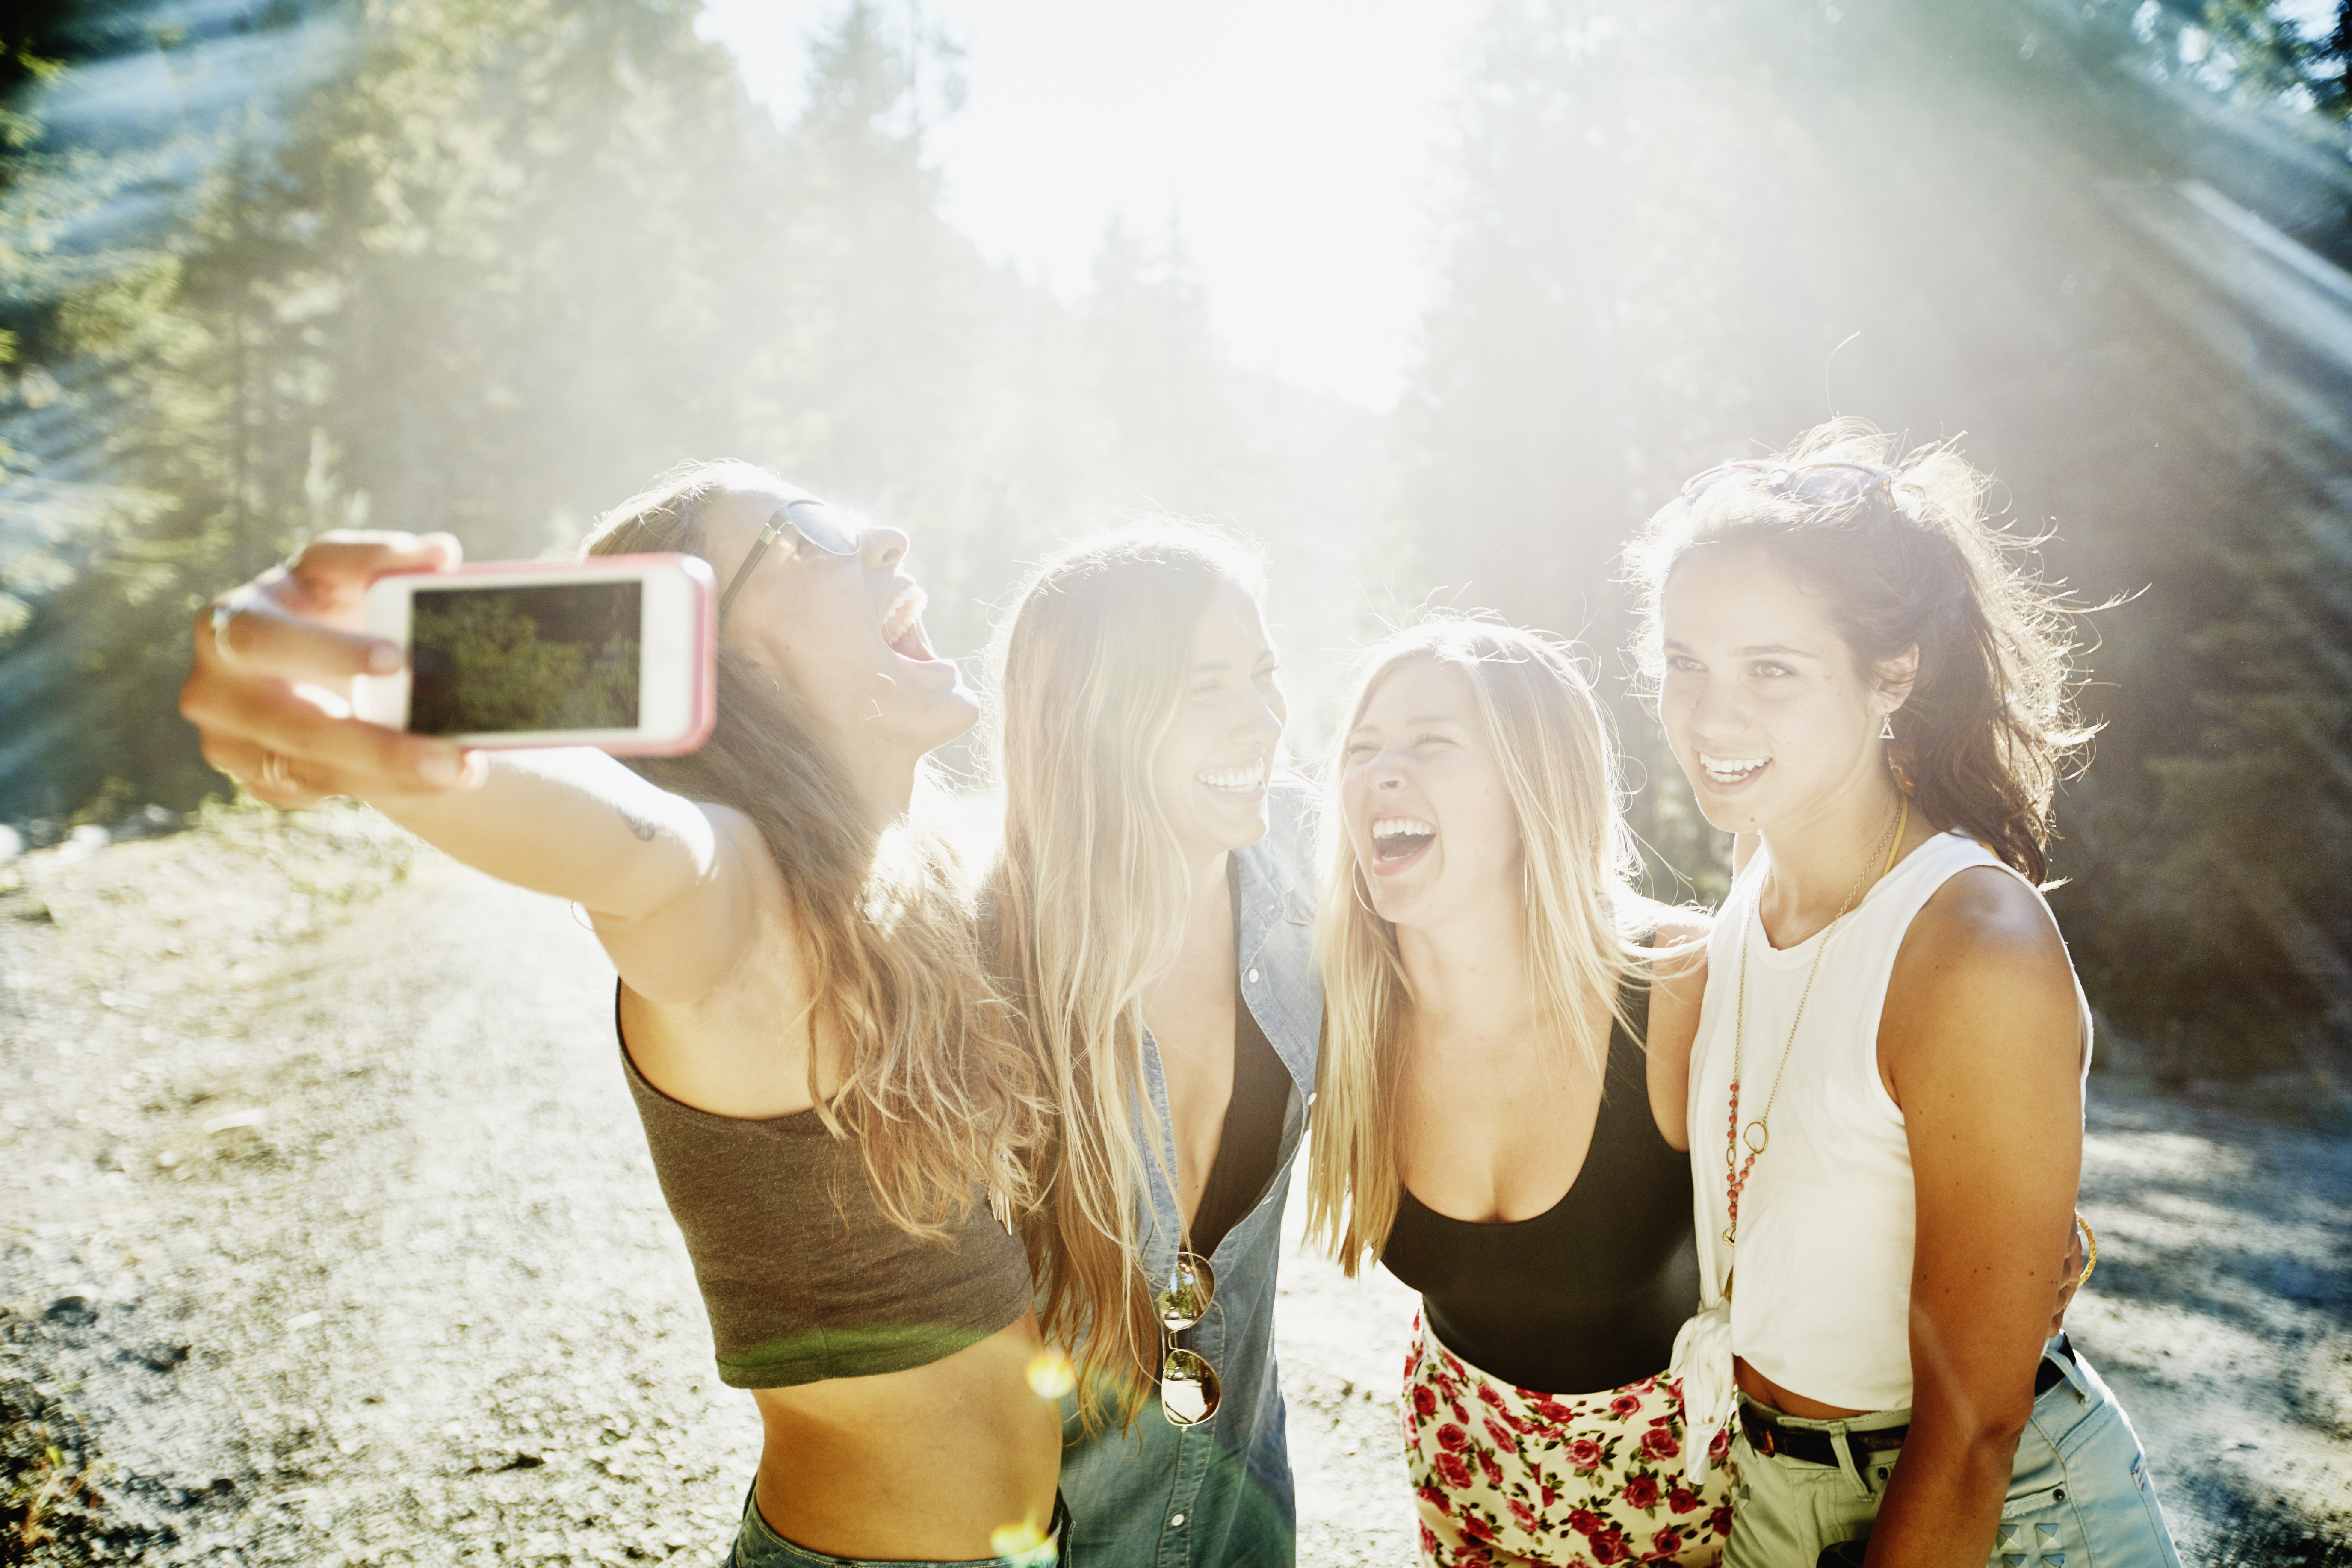 Four young women taking a selfie | Source: Getty Images